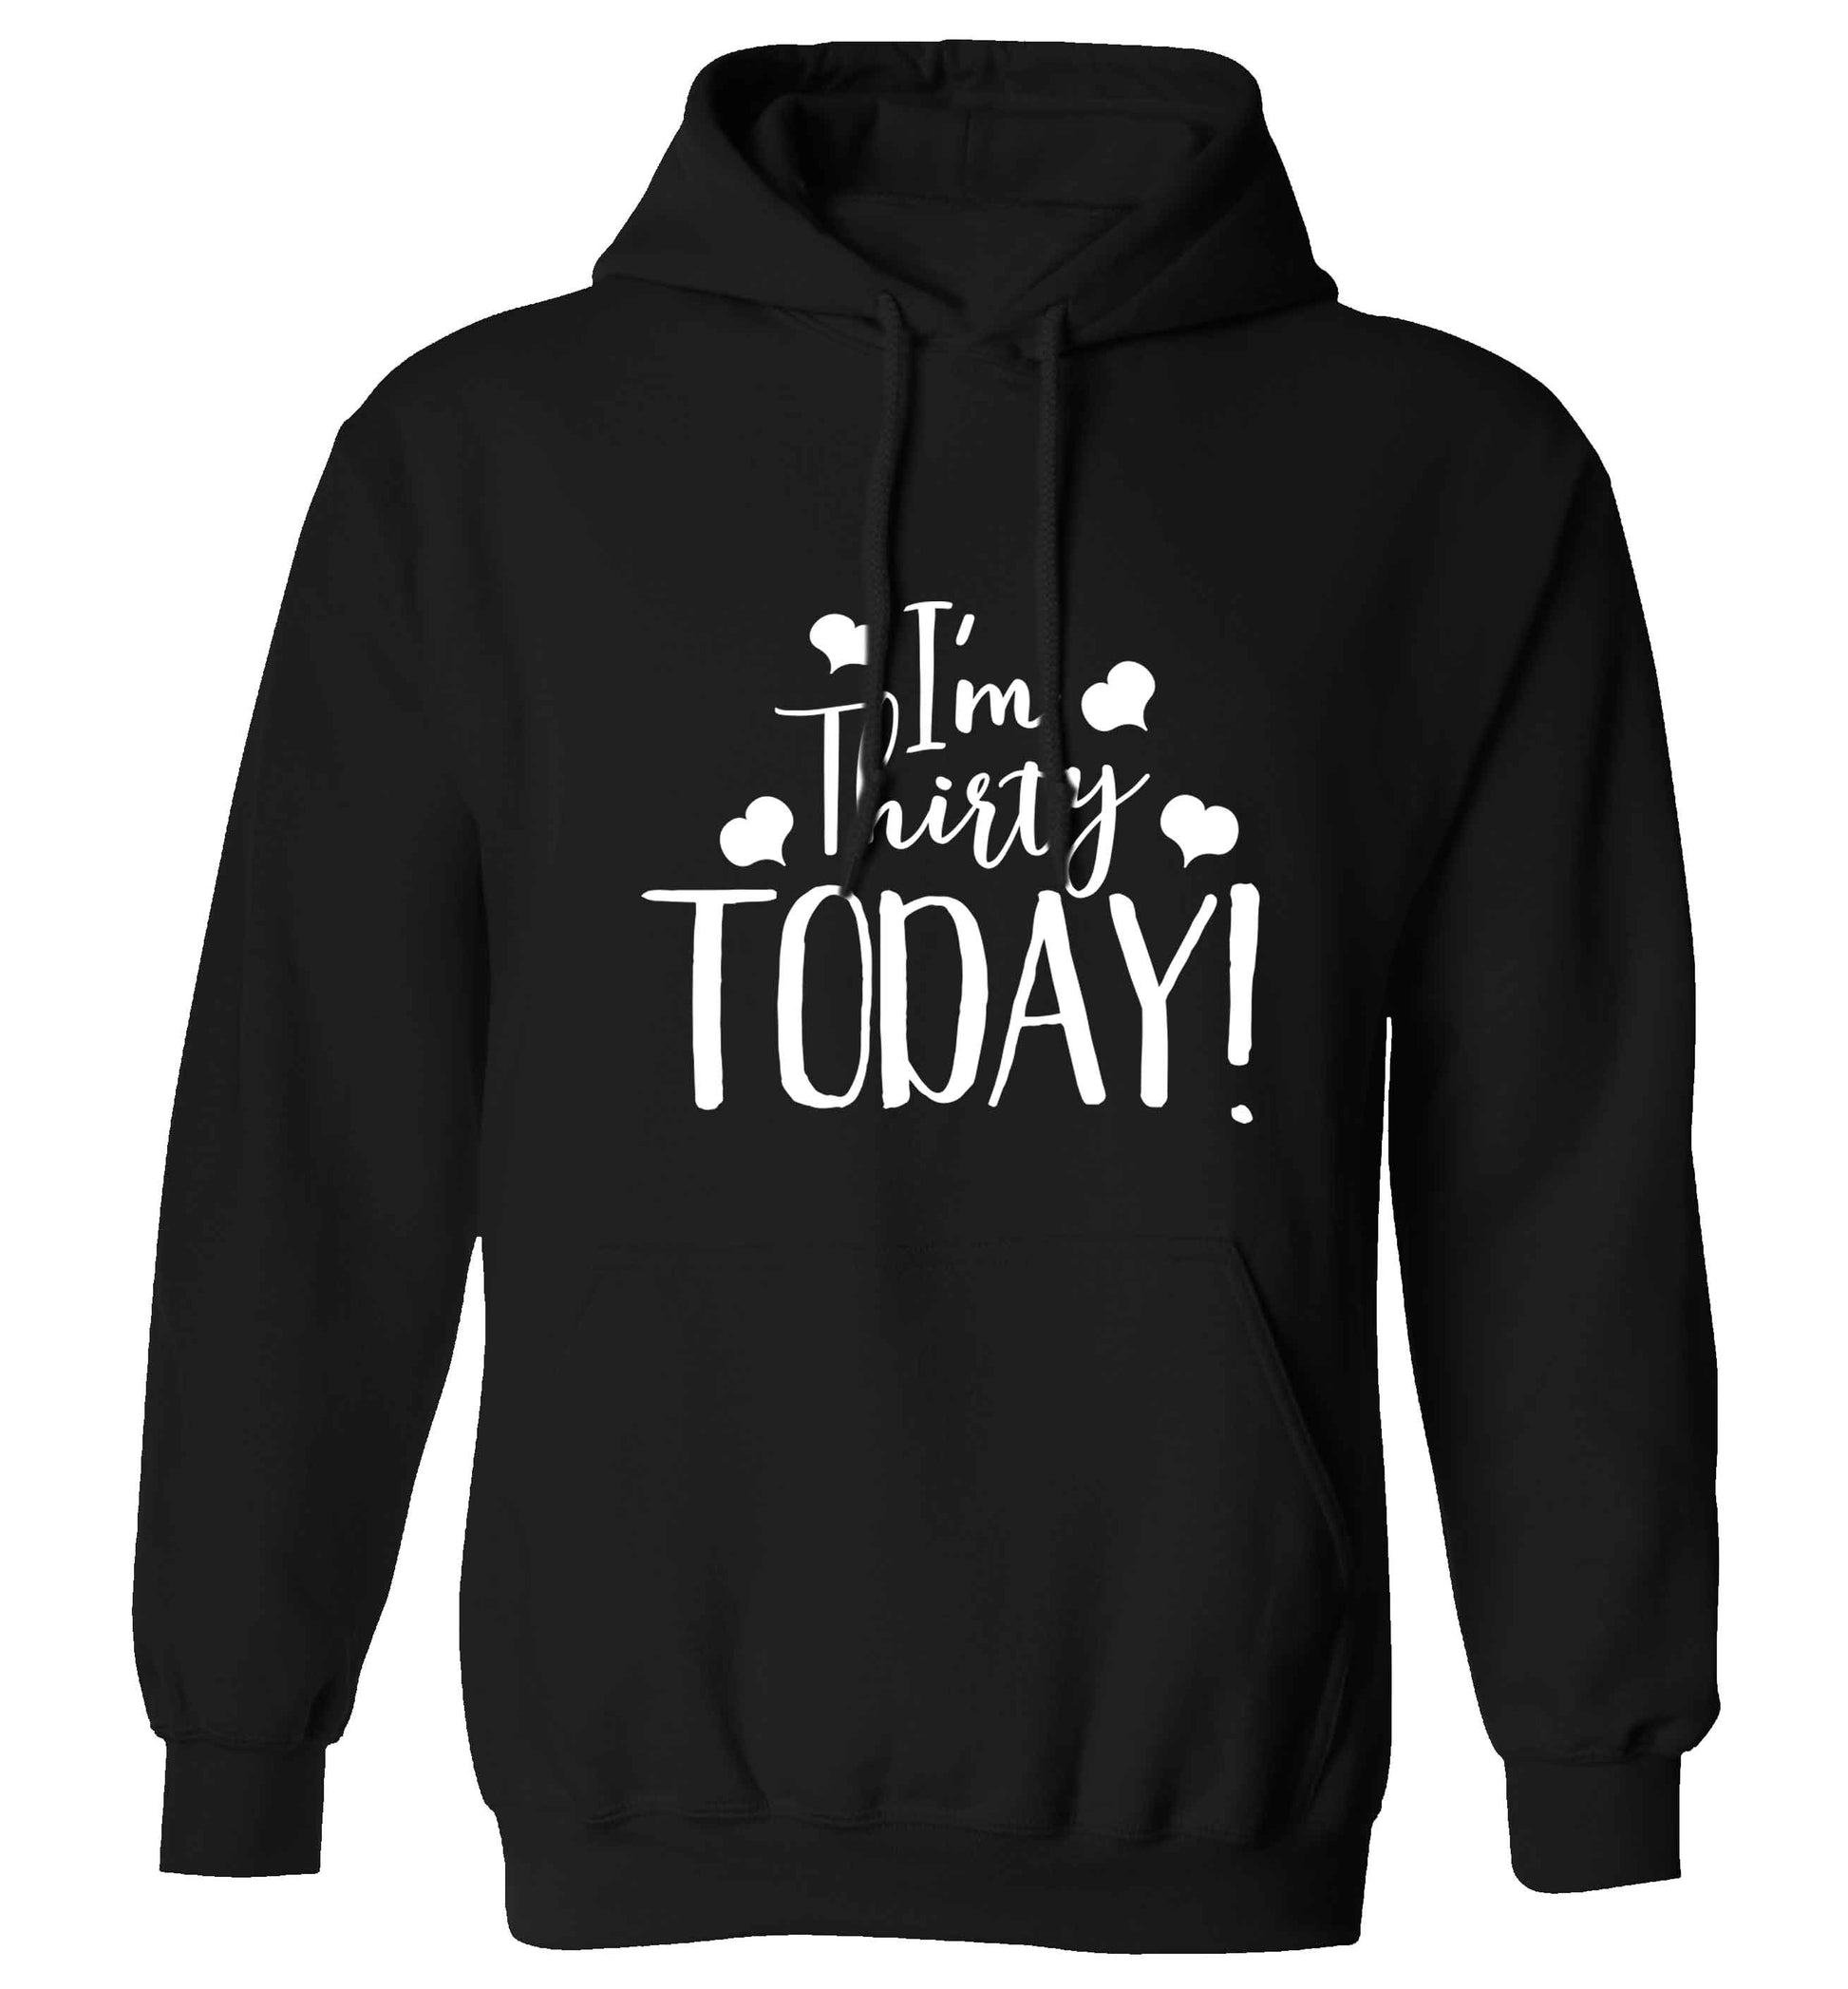 I'm thirty today! adults unisex black hoodie 2XL